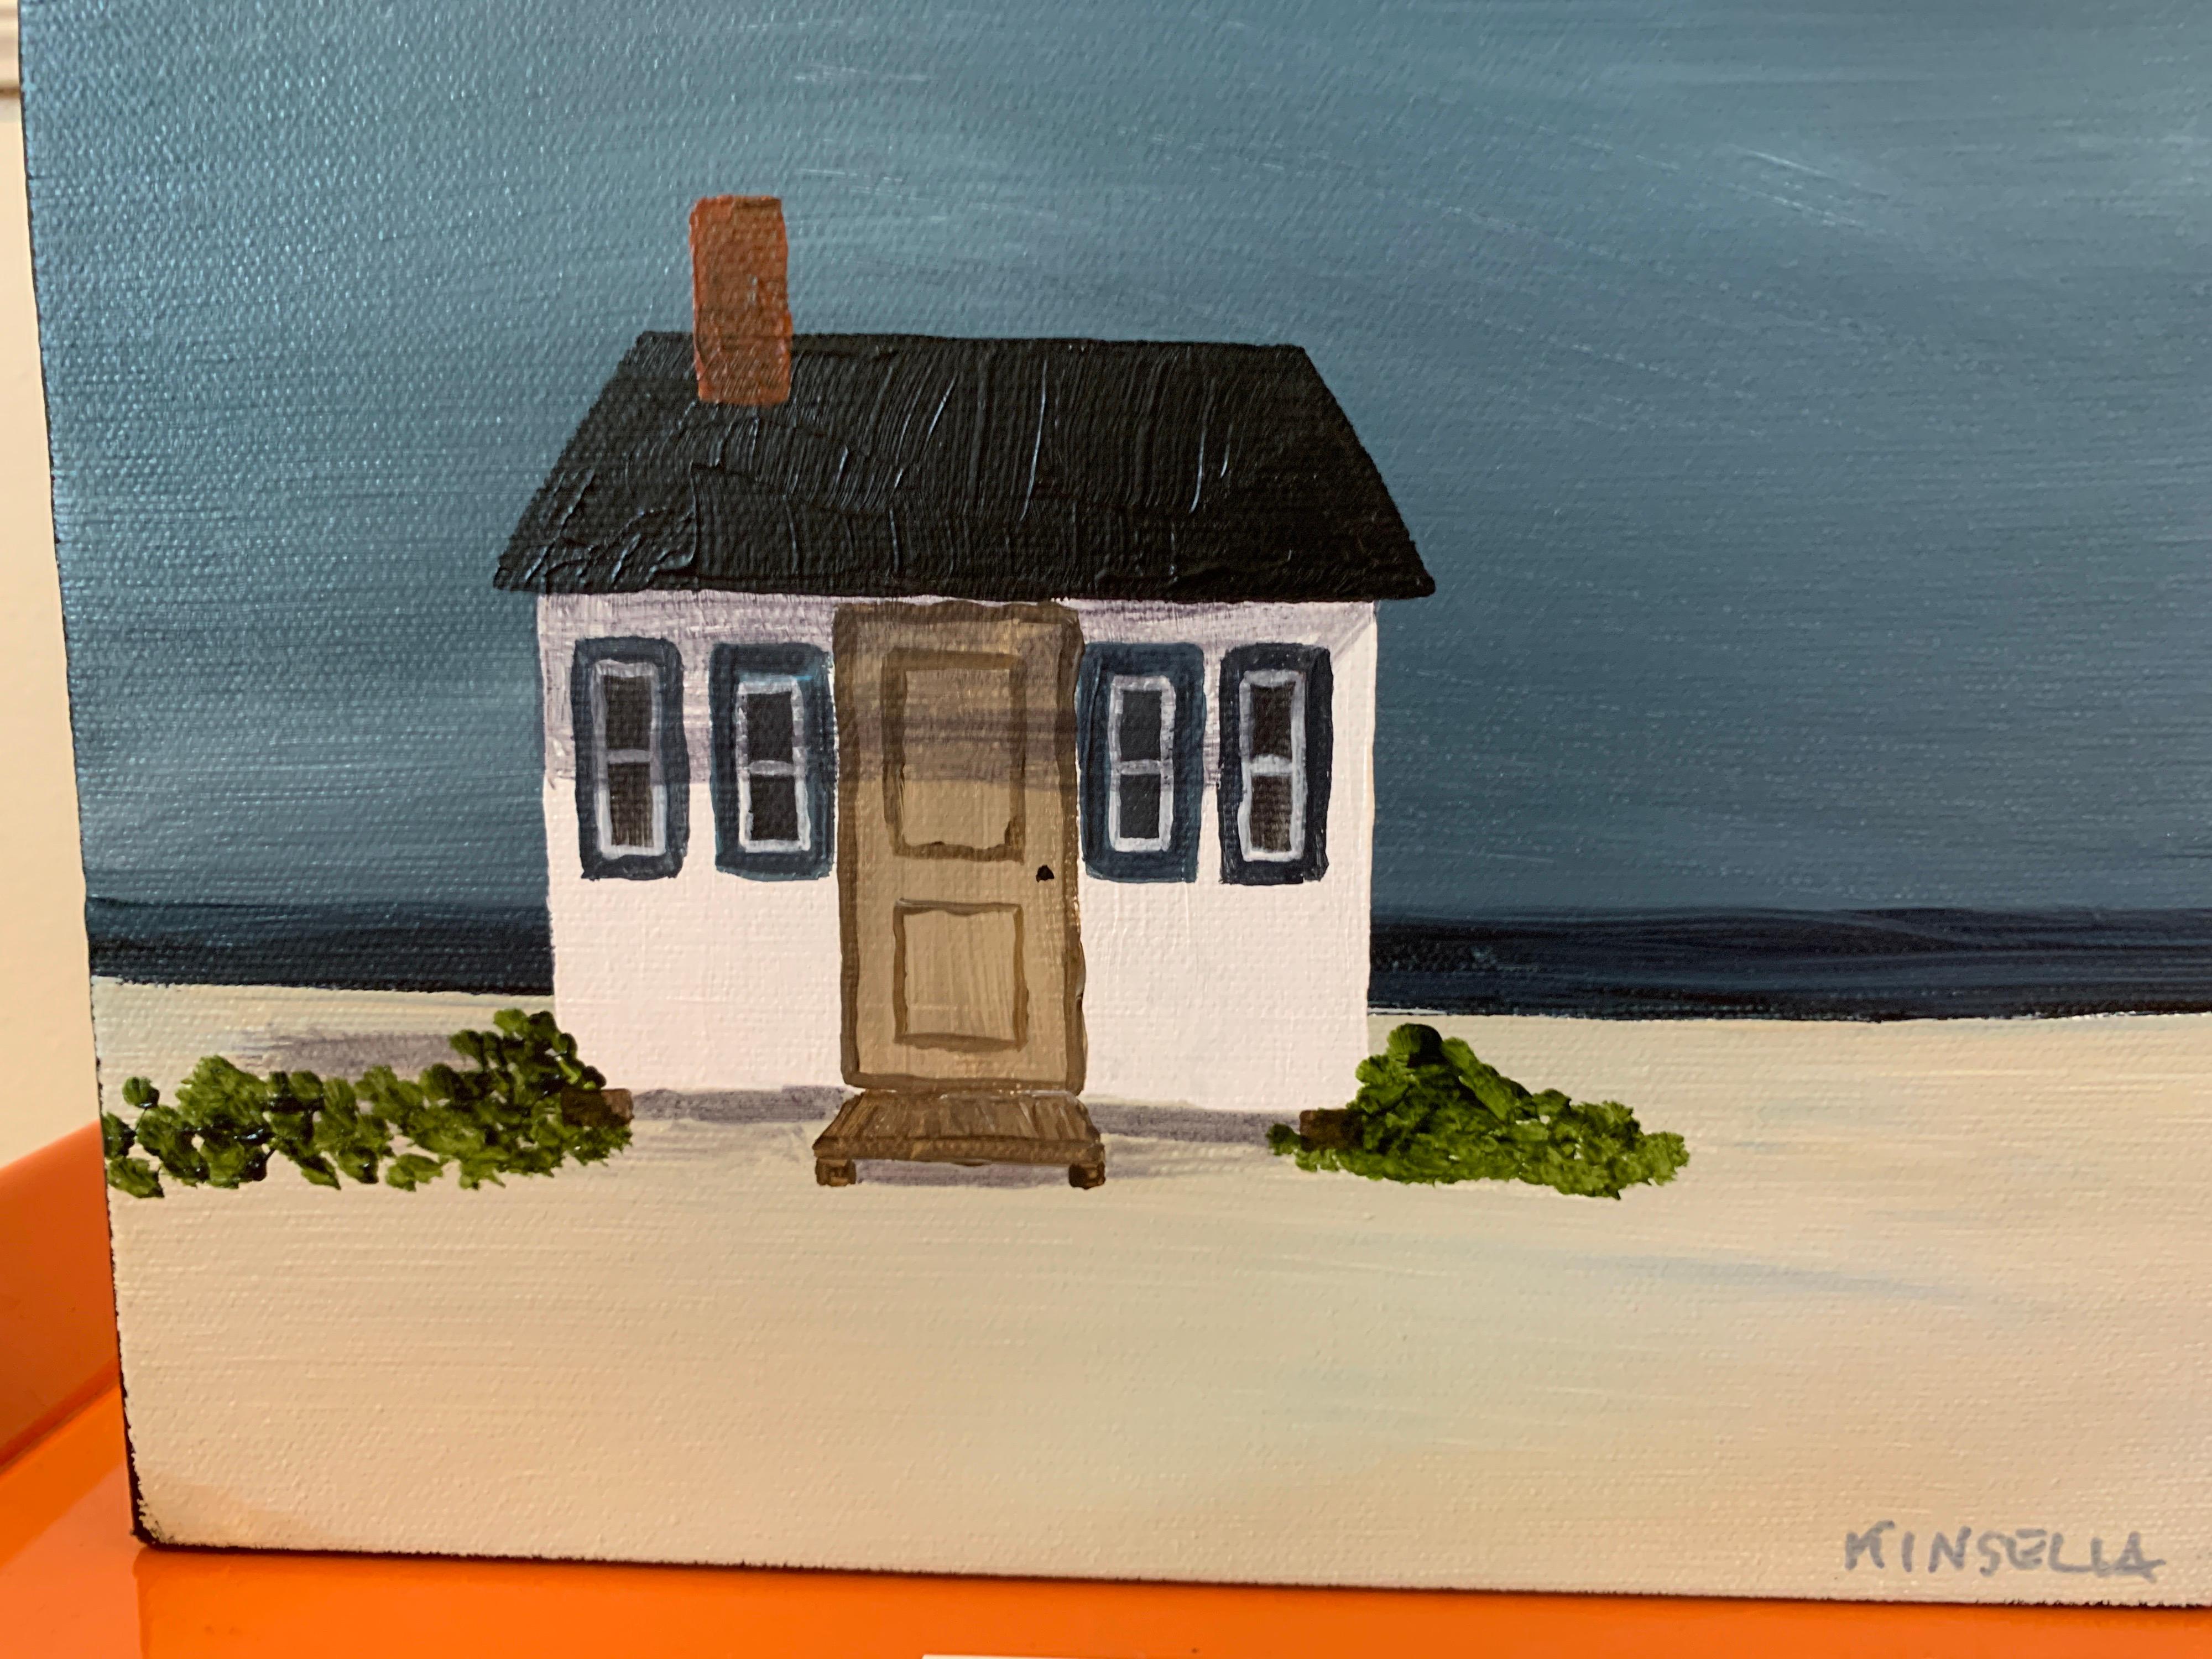 Tiny Cottage by Susan Kinsella, Beachscape Acrylic on Canvas Painting 2